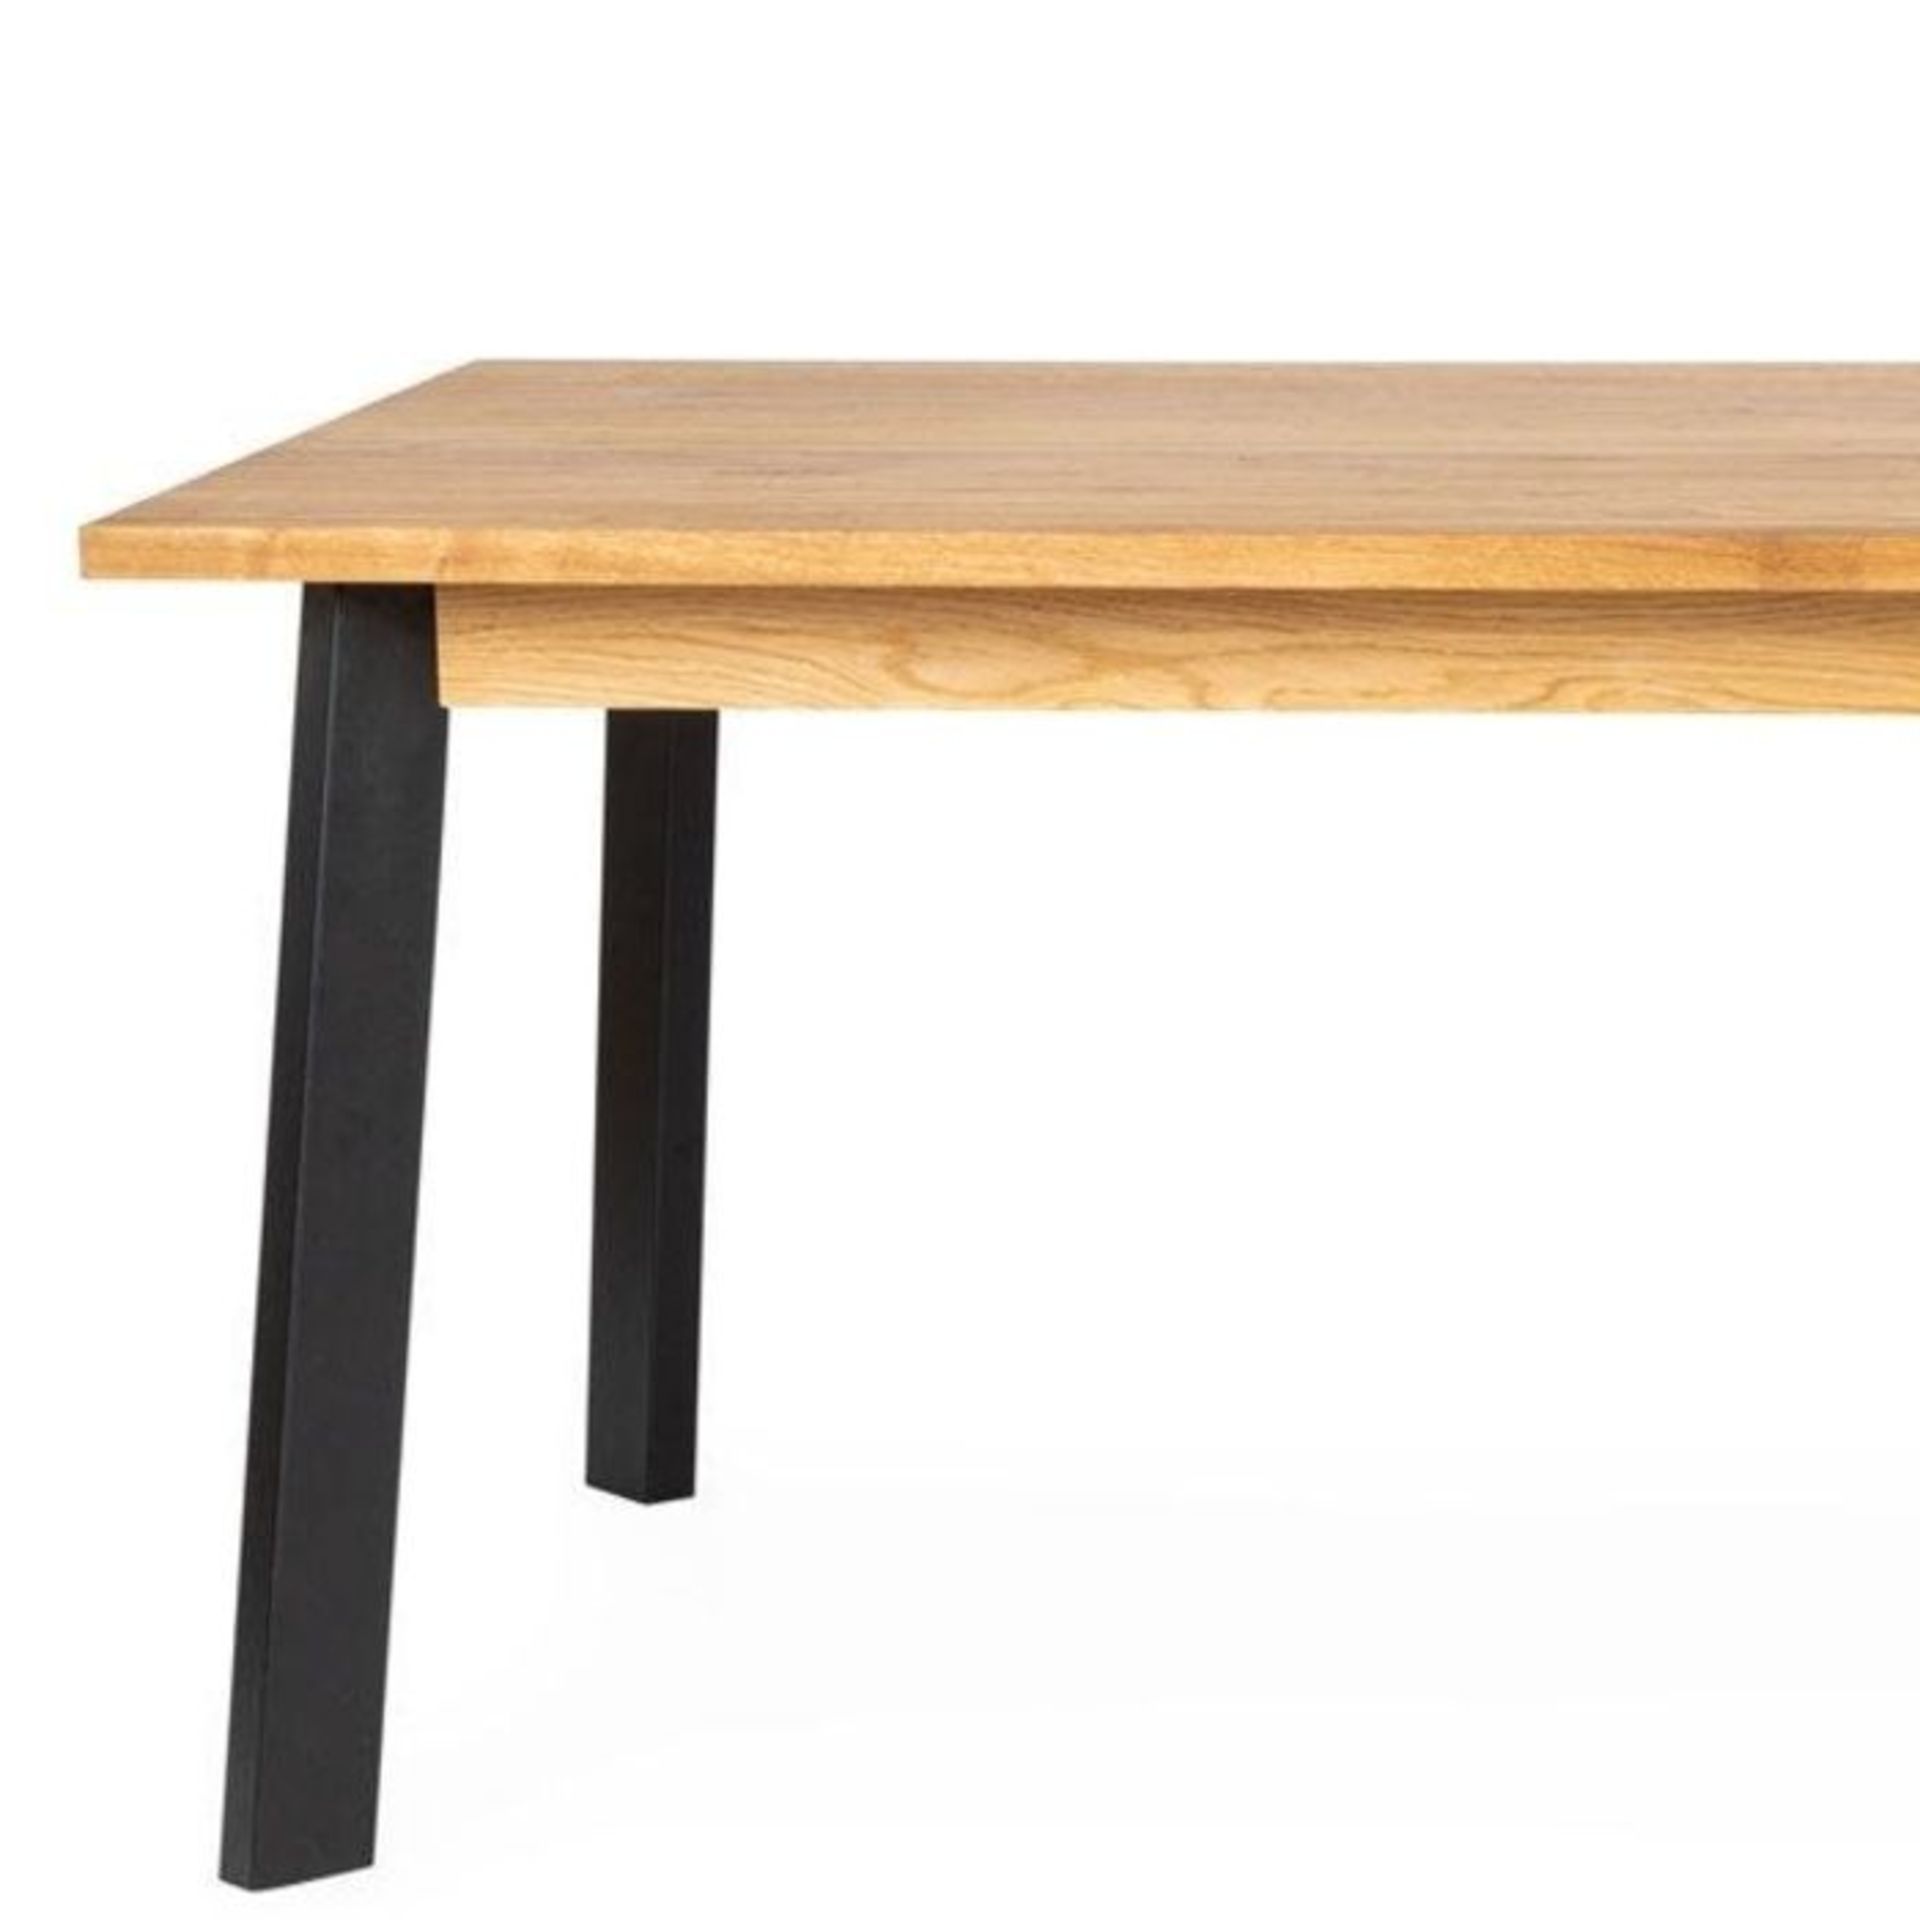 Heals Nova Extending Dining Table Smoked Oiled Oak L200 + 50cm x2 RRP ?3899.00 The Nova Dining Table - Image 6 of 6